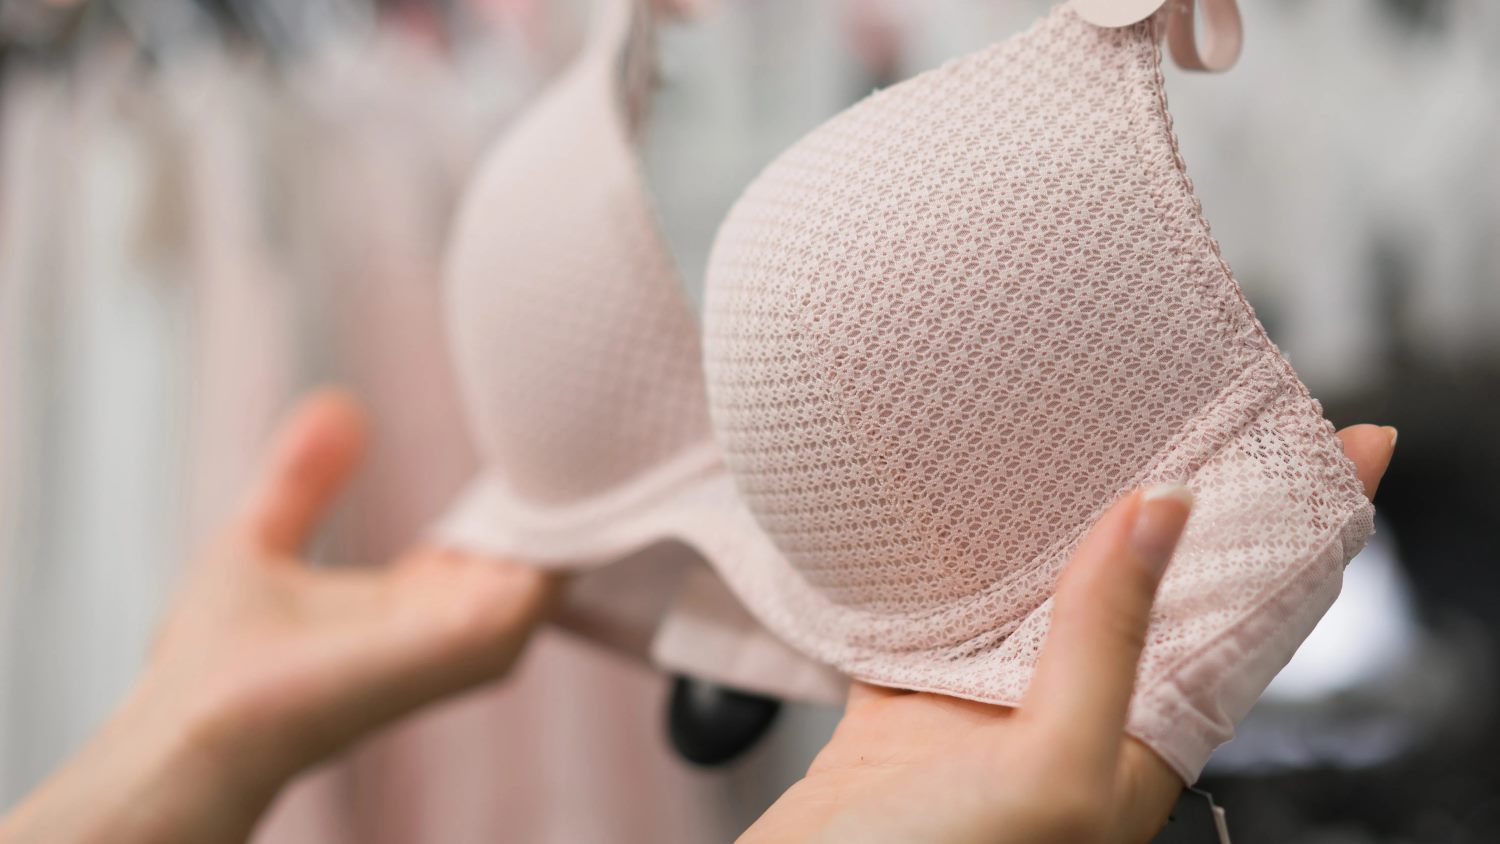 How To Properly Fit Bra